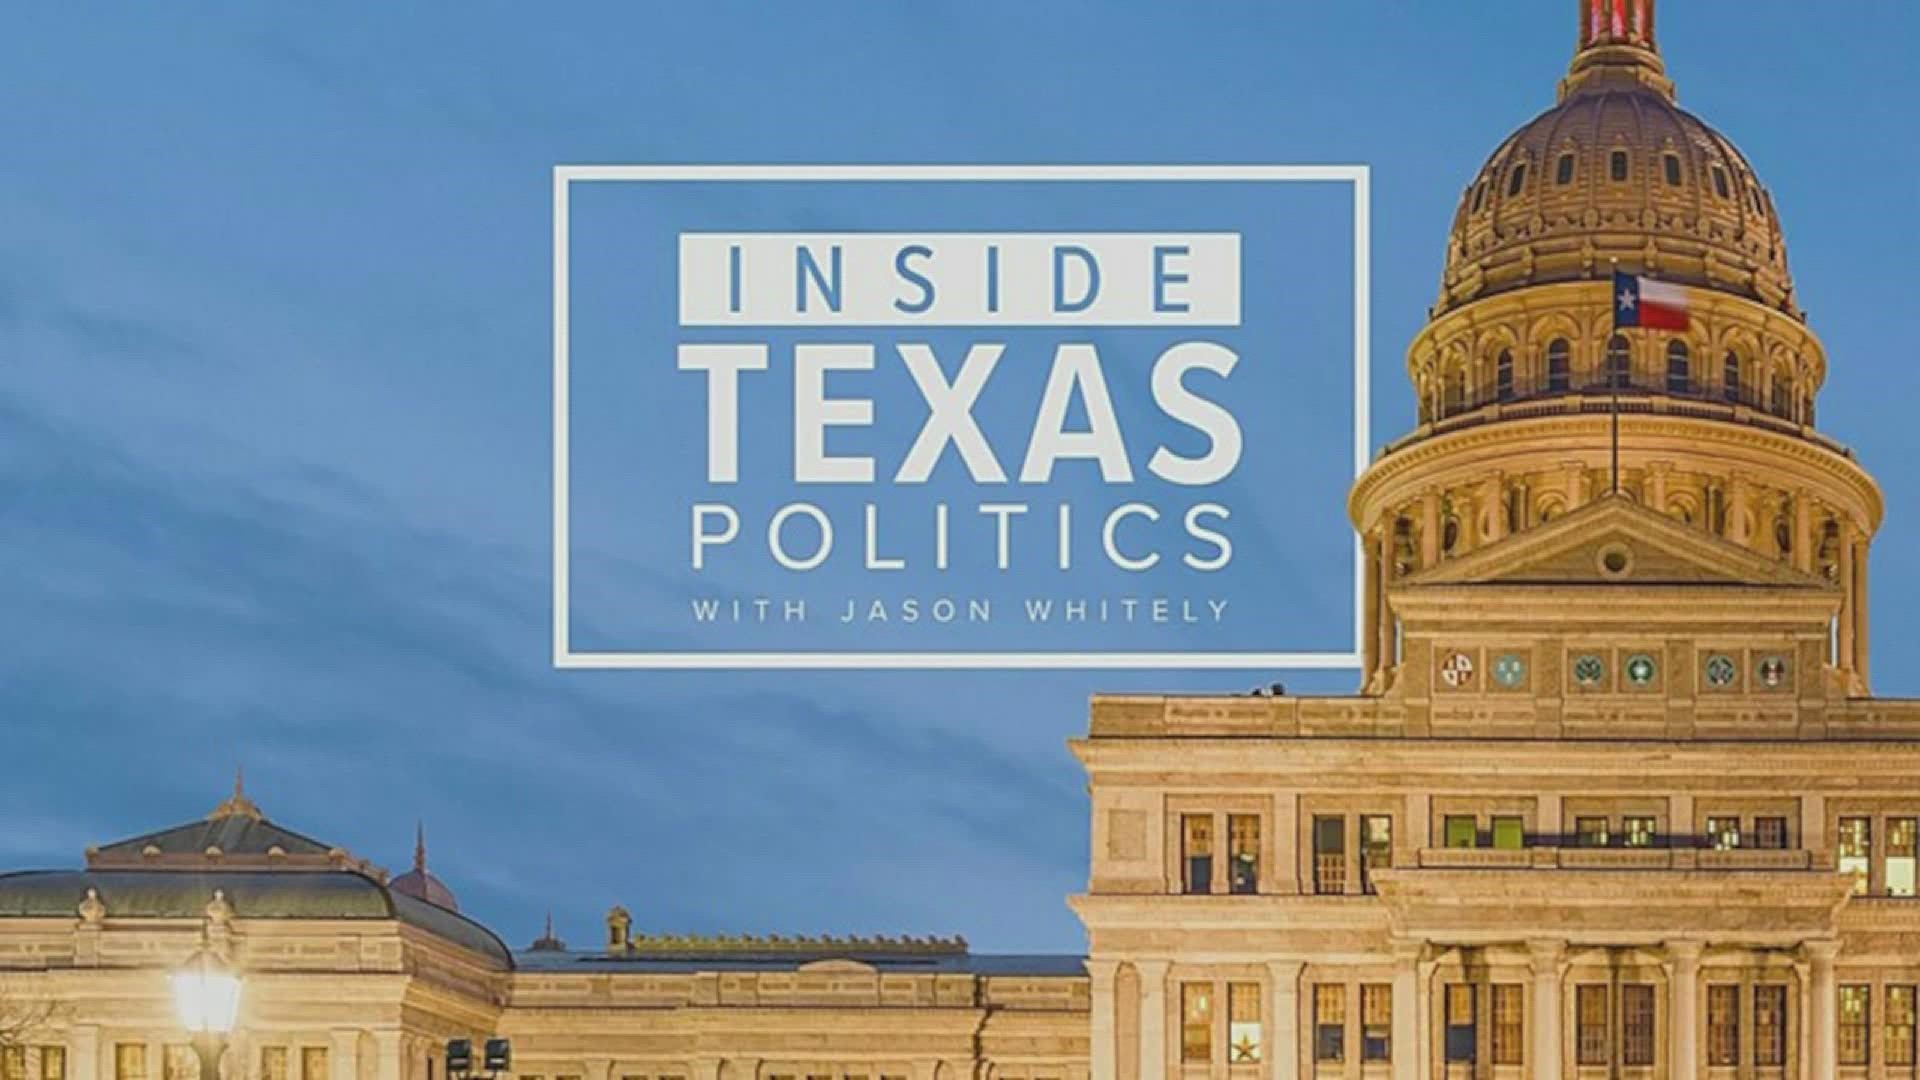 WFAA's Teresa Woodard, in for Jason Whitely, leads discussions with local lawmakers and community leaders, providing in-depth analysis of Texas politics.